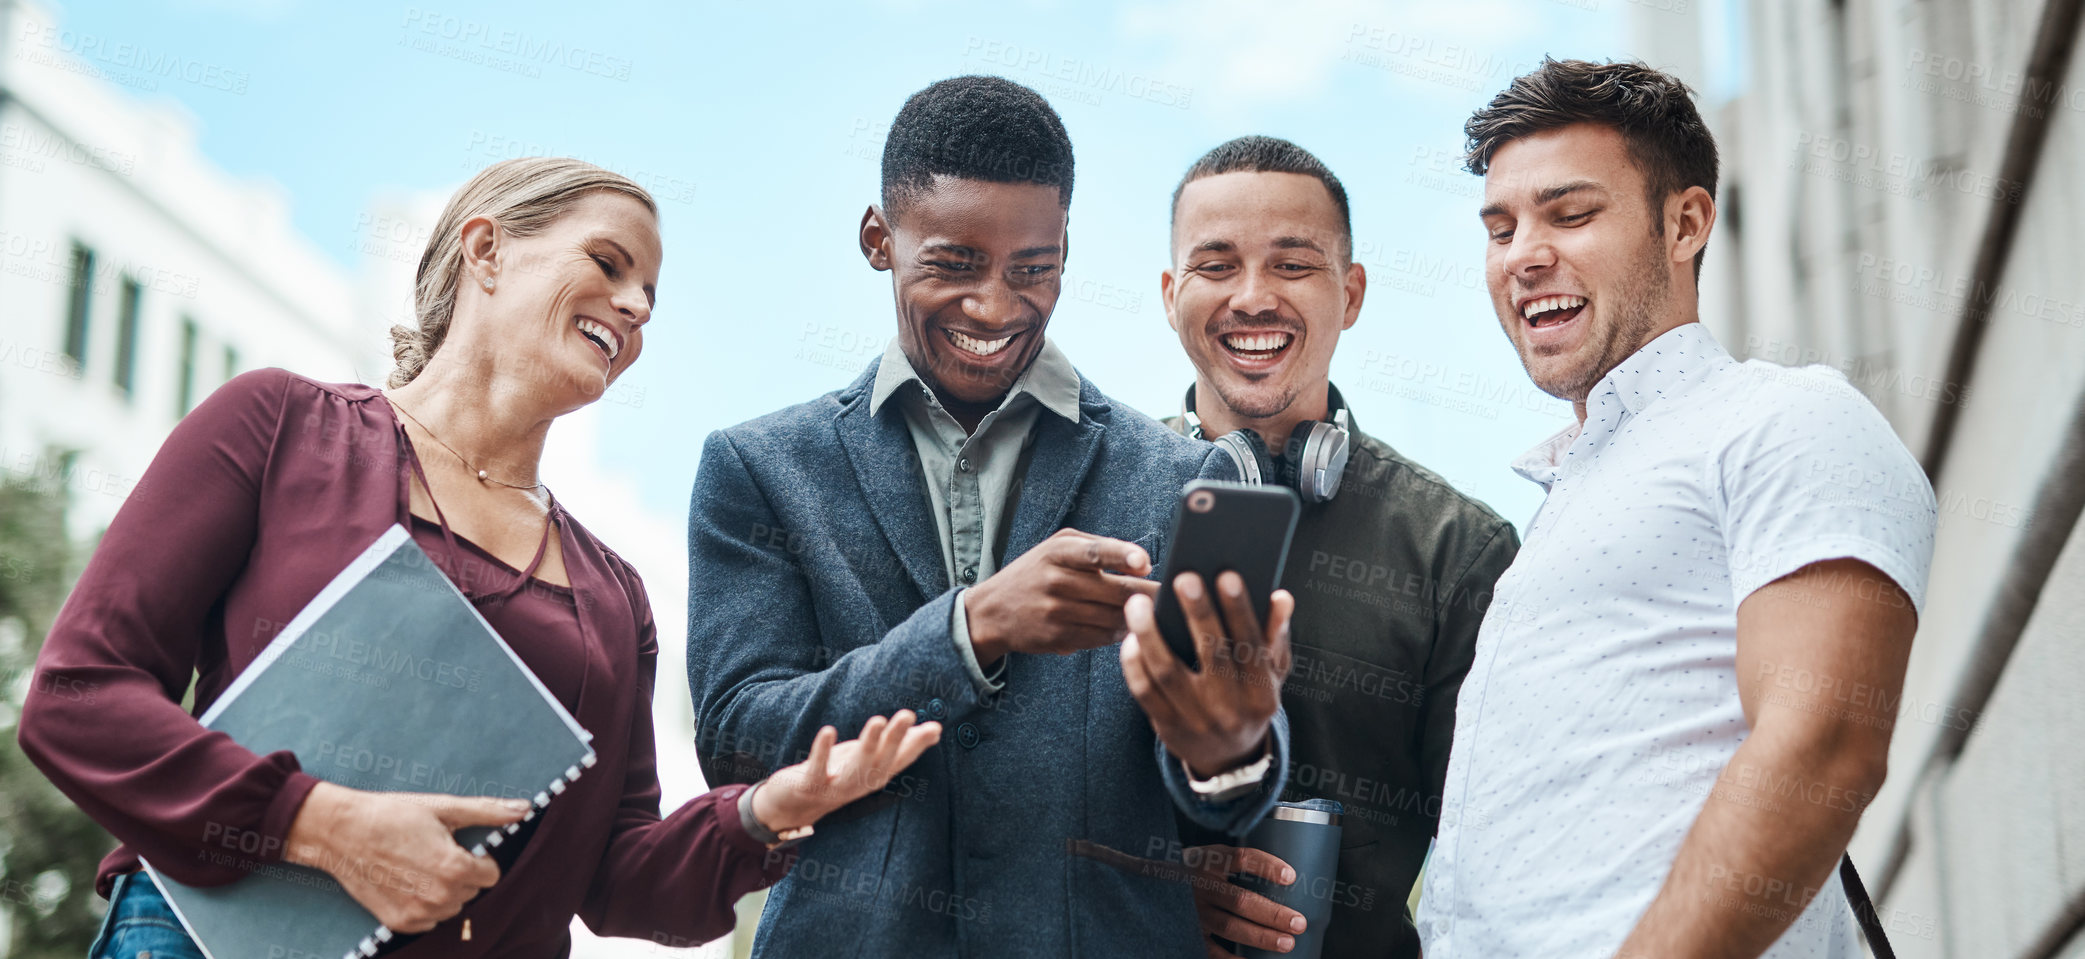 Buy stock photo Shot of a group of businesspeople using a smartphone together against an urban background